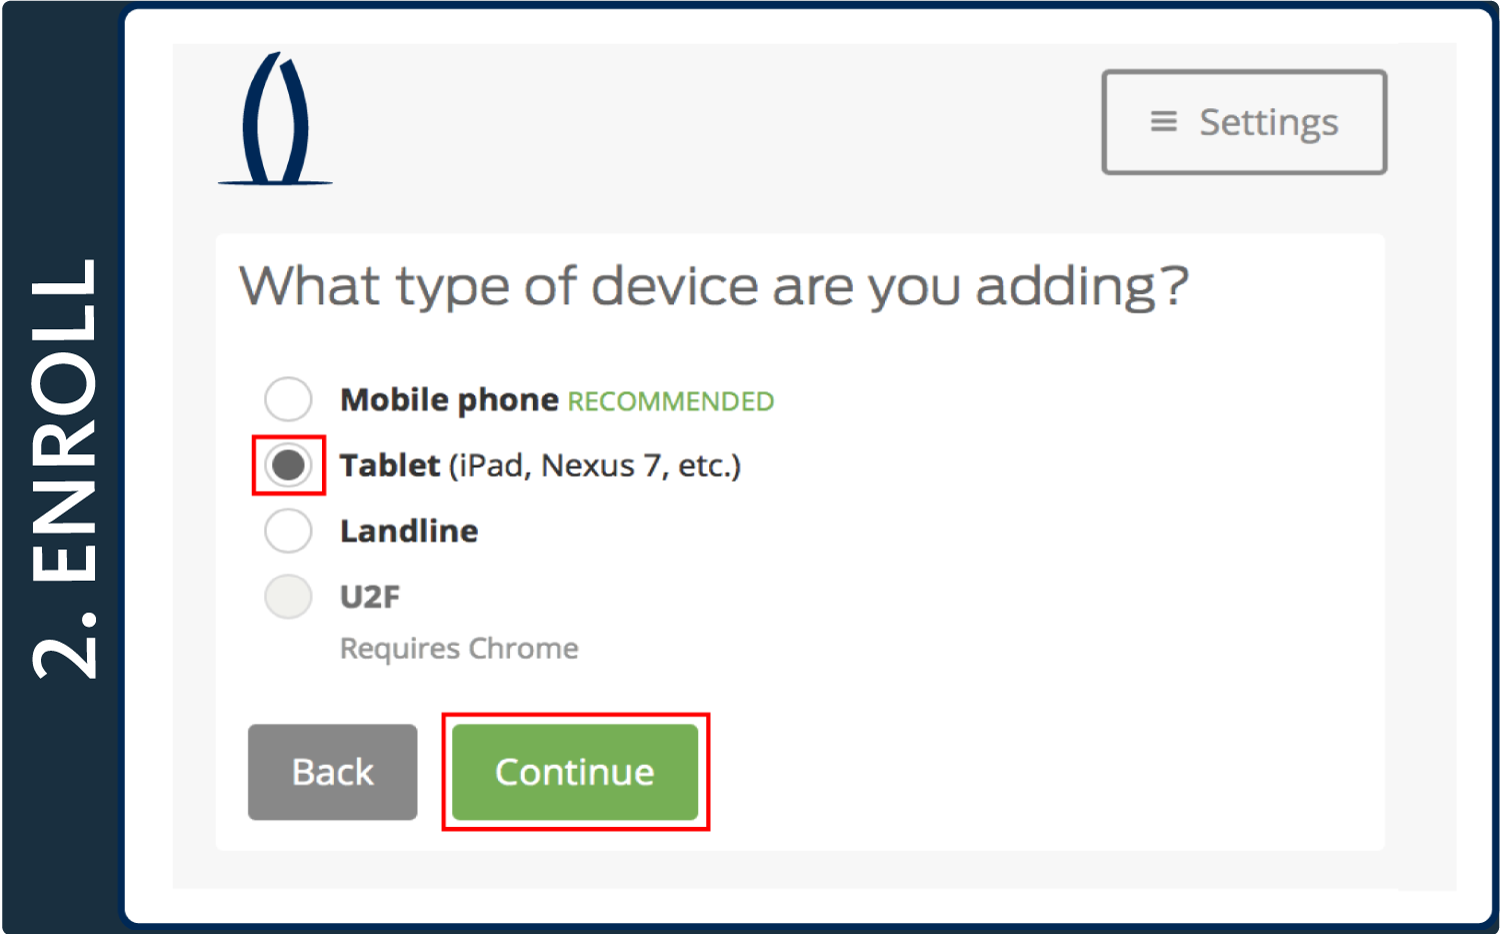 Select your device type, then click Continue.